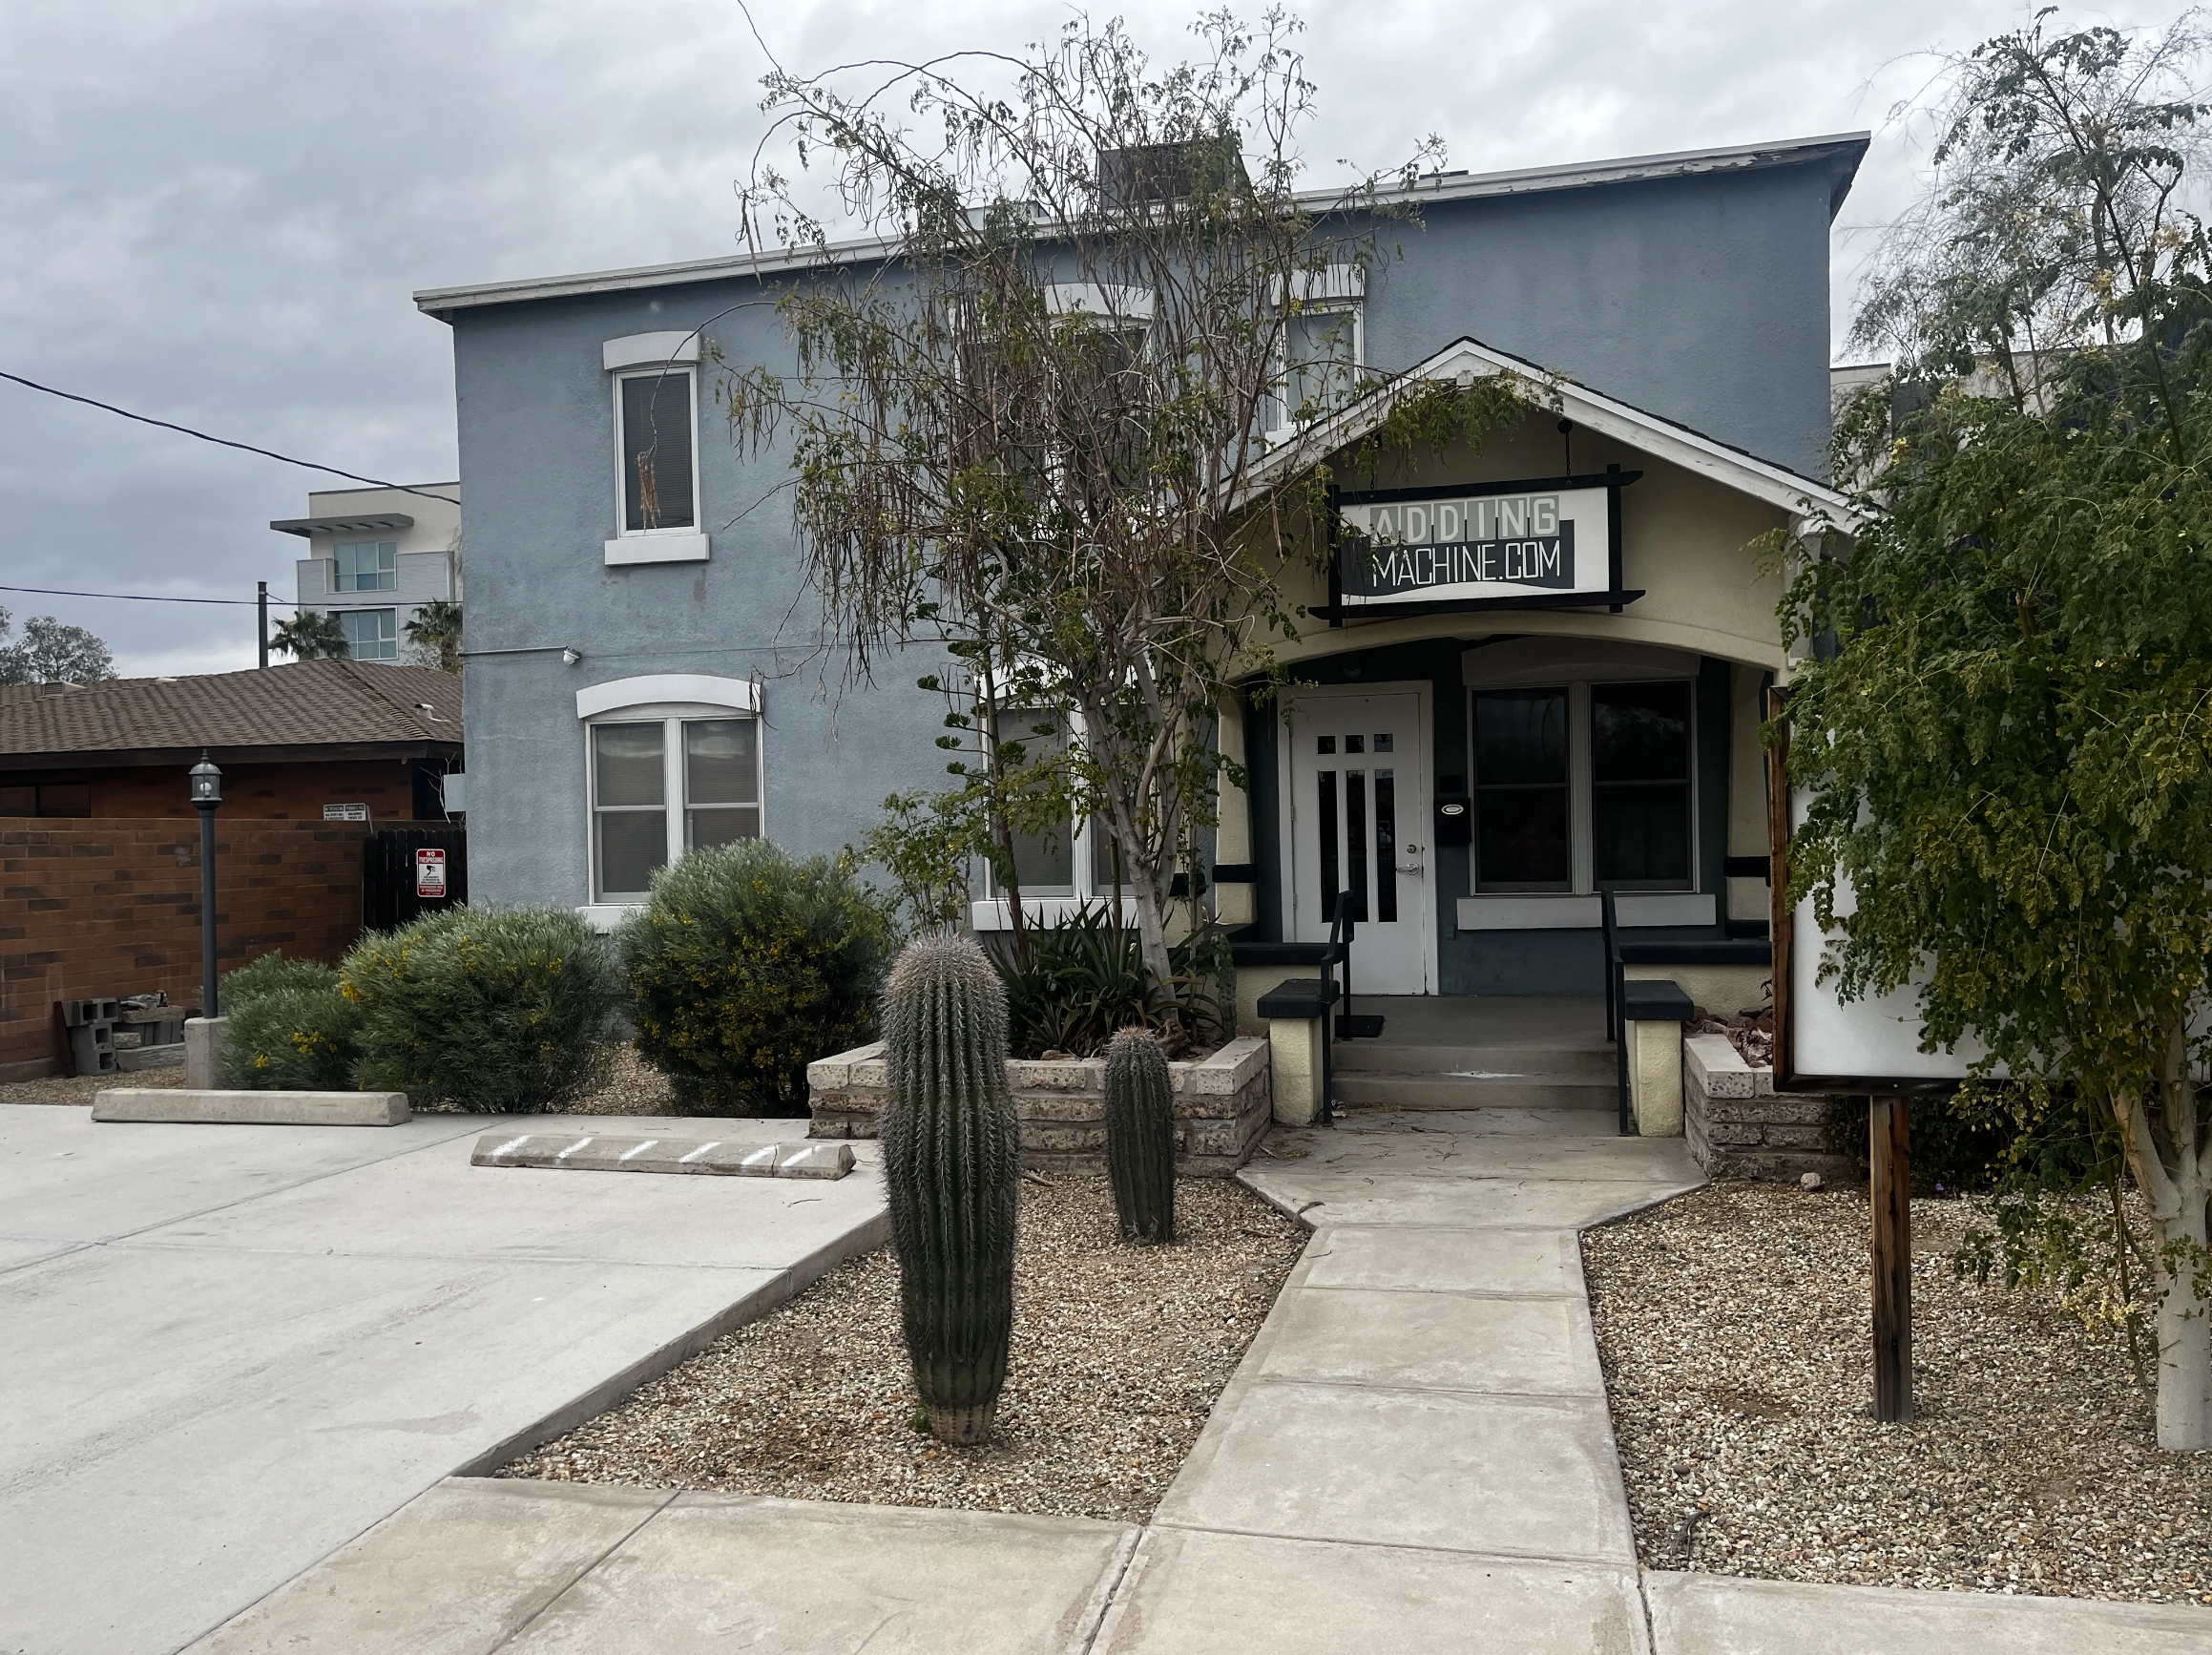 The former Swindall's Tourist Home near downtown Phoenix.  It's one of the last two Green Book structures still standing in the city.